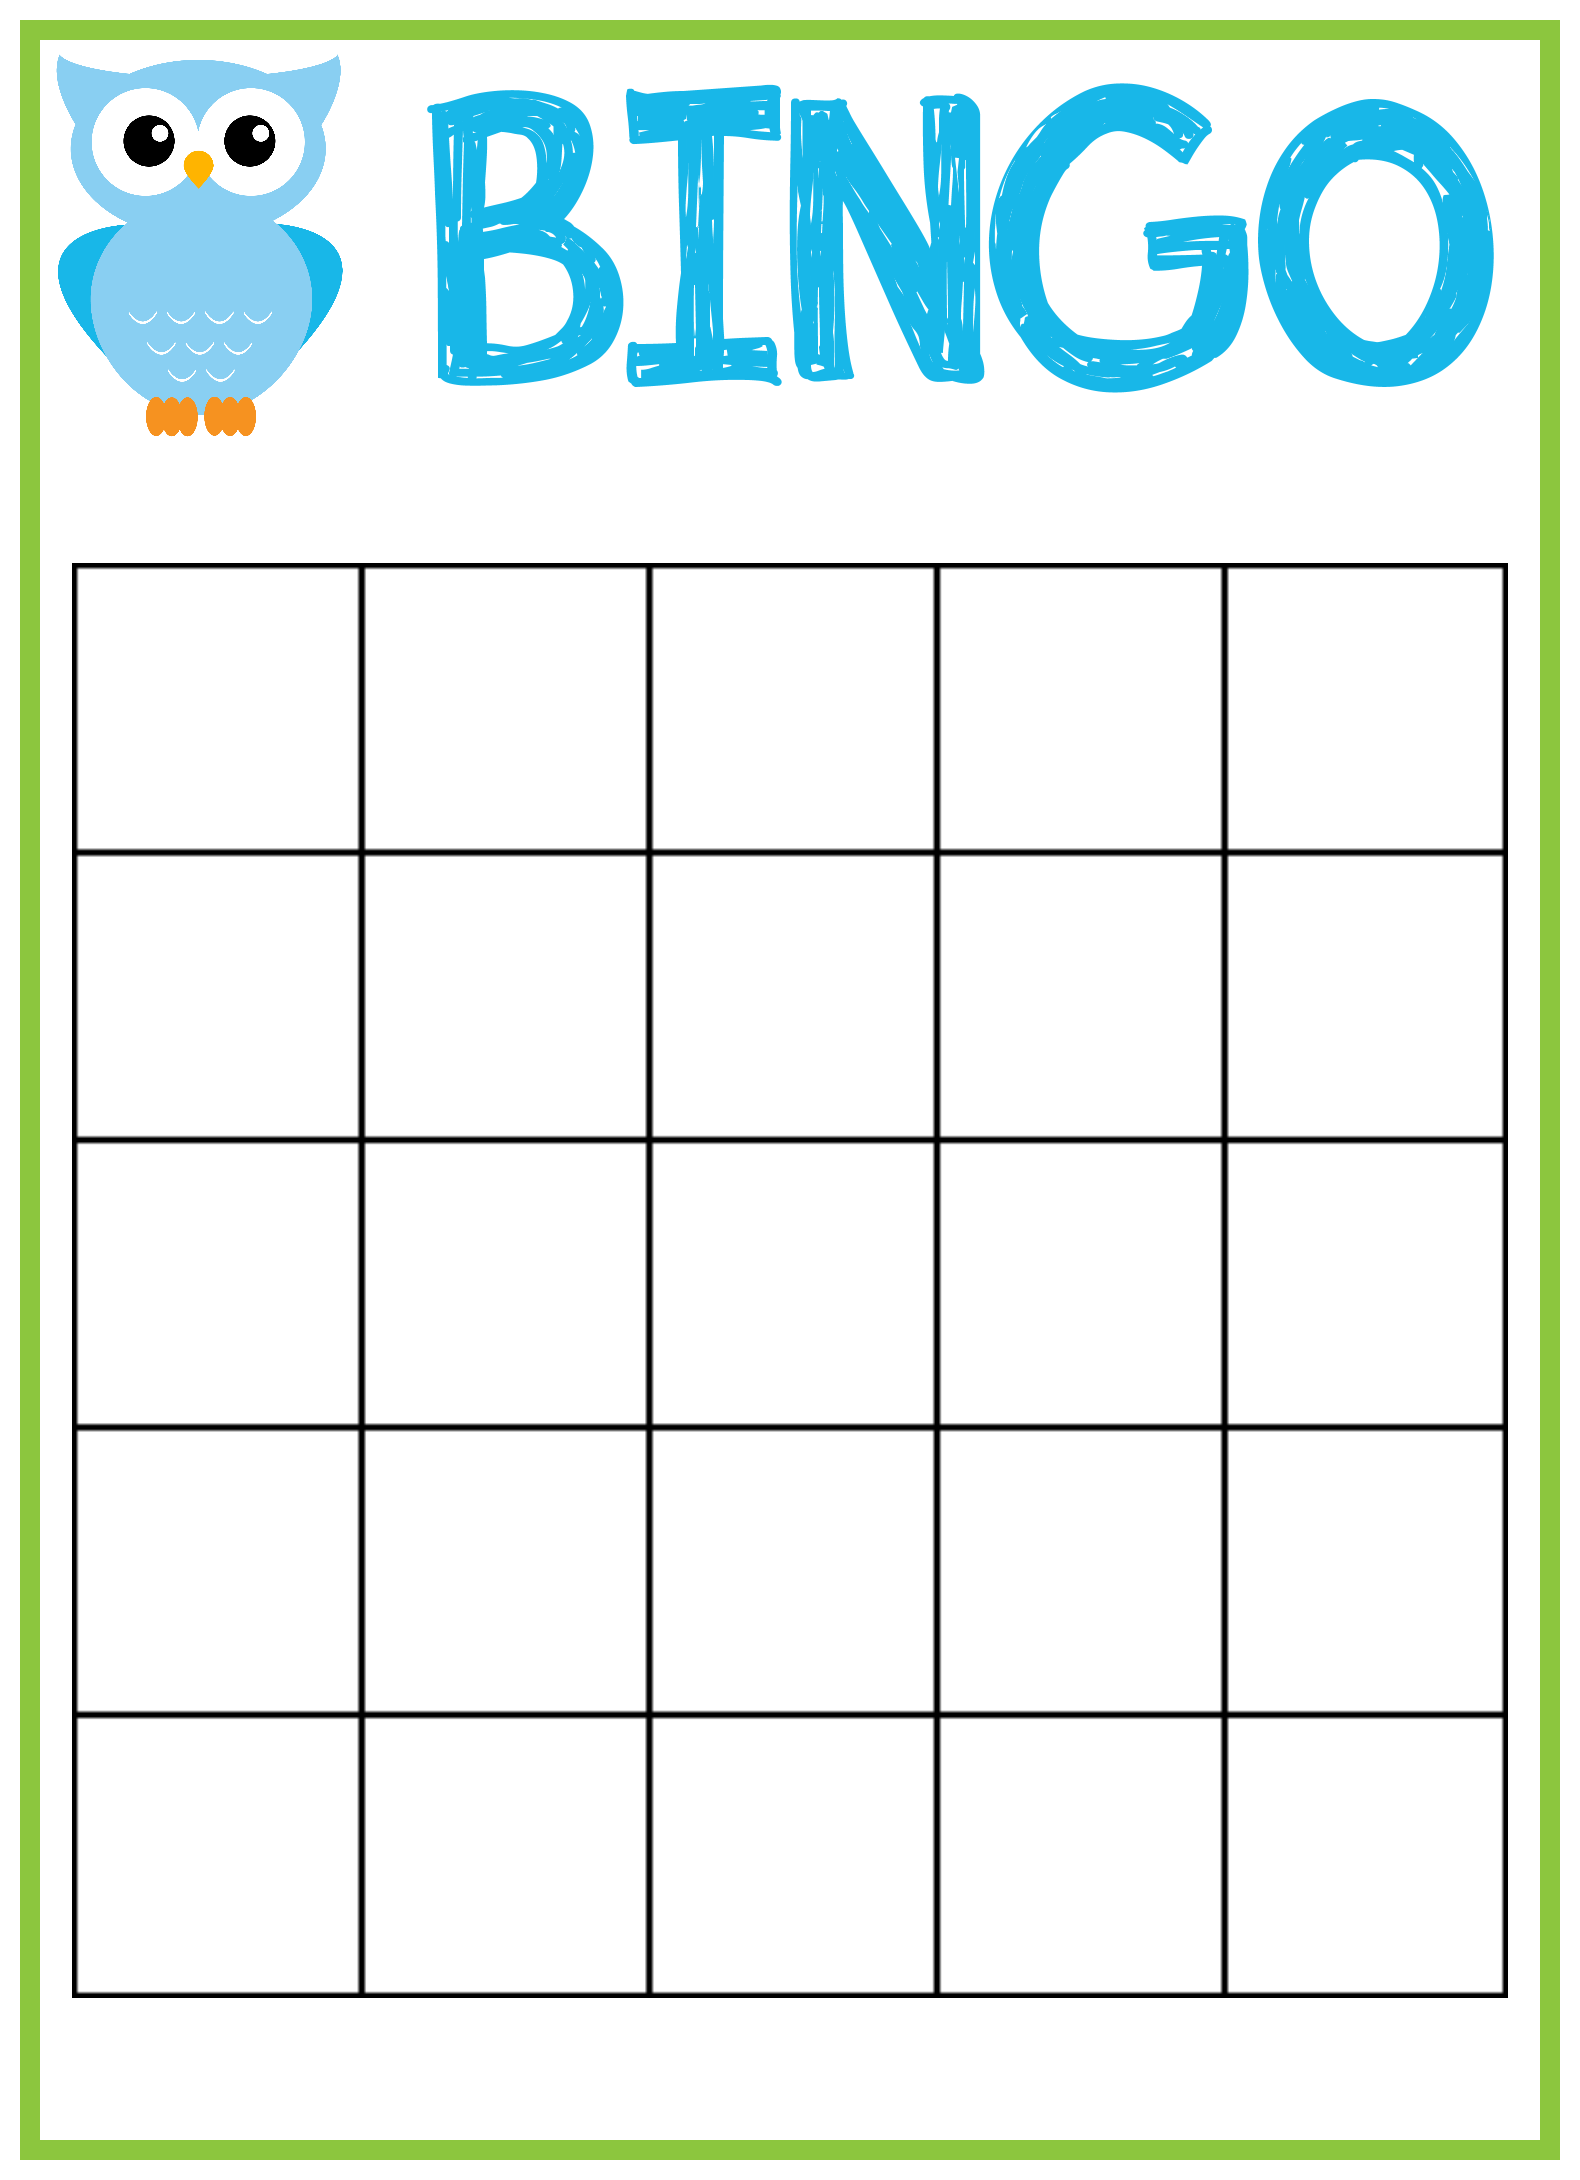 16 Free Printable Bingo Card Template In Word for Ms Word for Bingo Card Template In Word